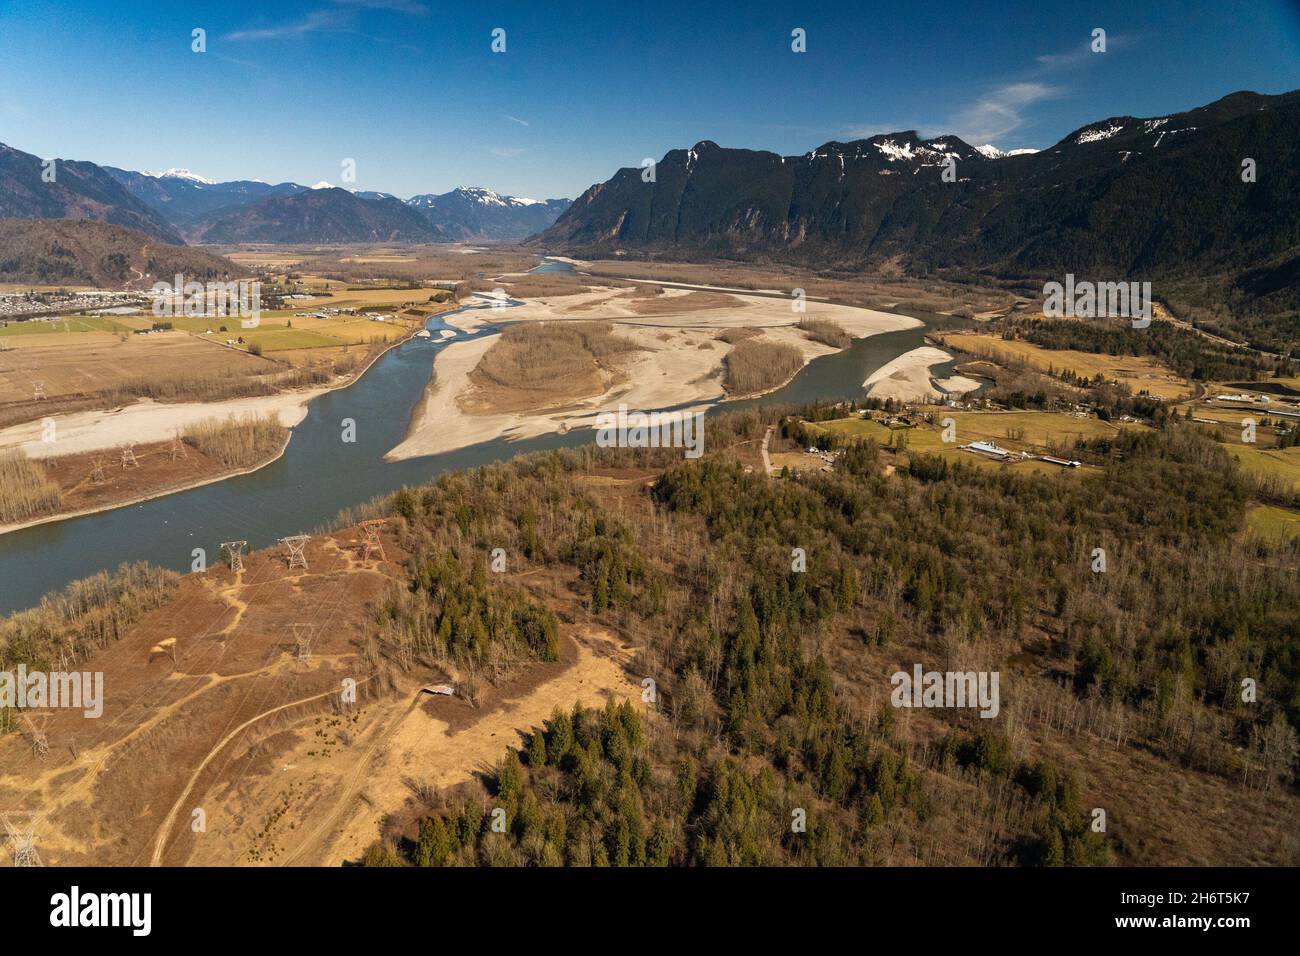 View of the Fraser River Valley with Herrling island and mount Cheam on the background, close to Bridal Falls and Island 22 provincial park. Stock Photo